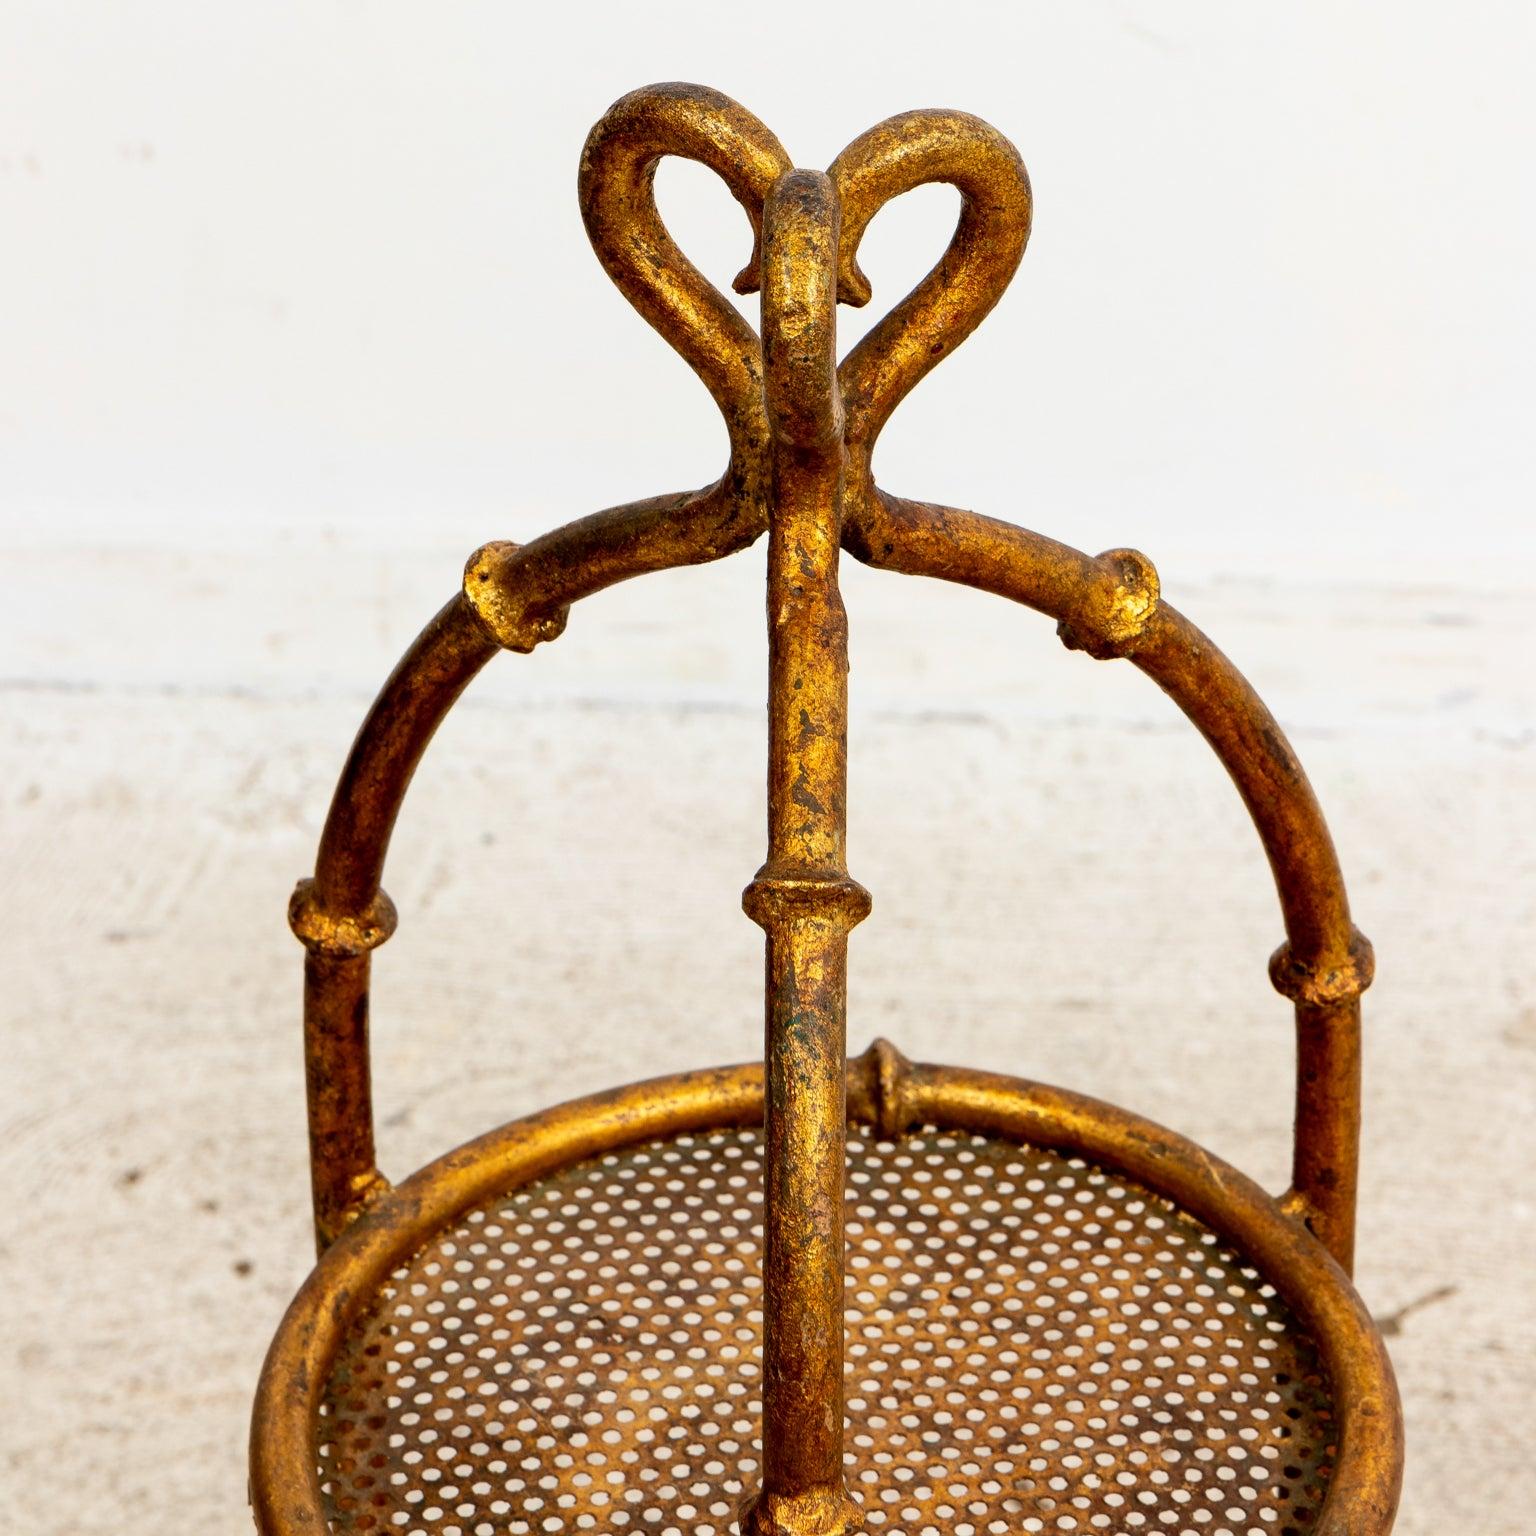 Midcentury gilt metal stand with 3 mesh surfaces has faux bamboo details. Can be placed on the floor or tabletop. Please note of wear consistent with age.